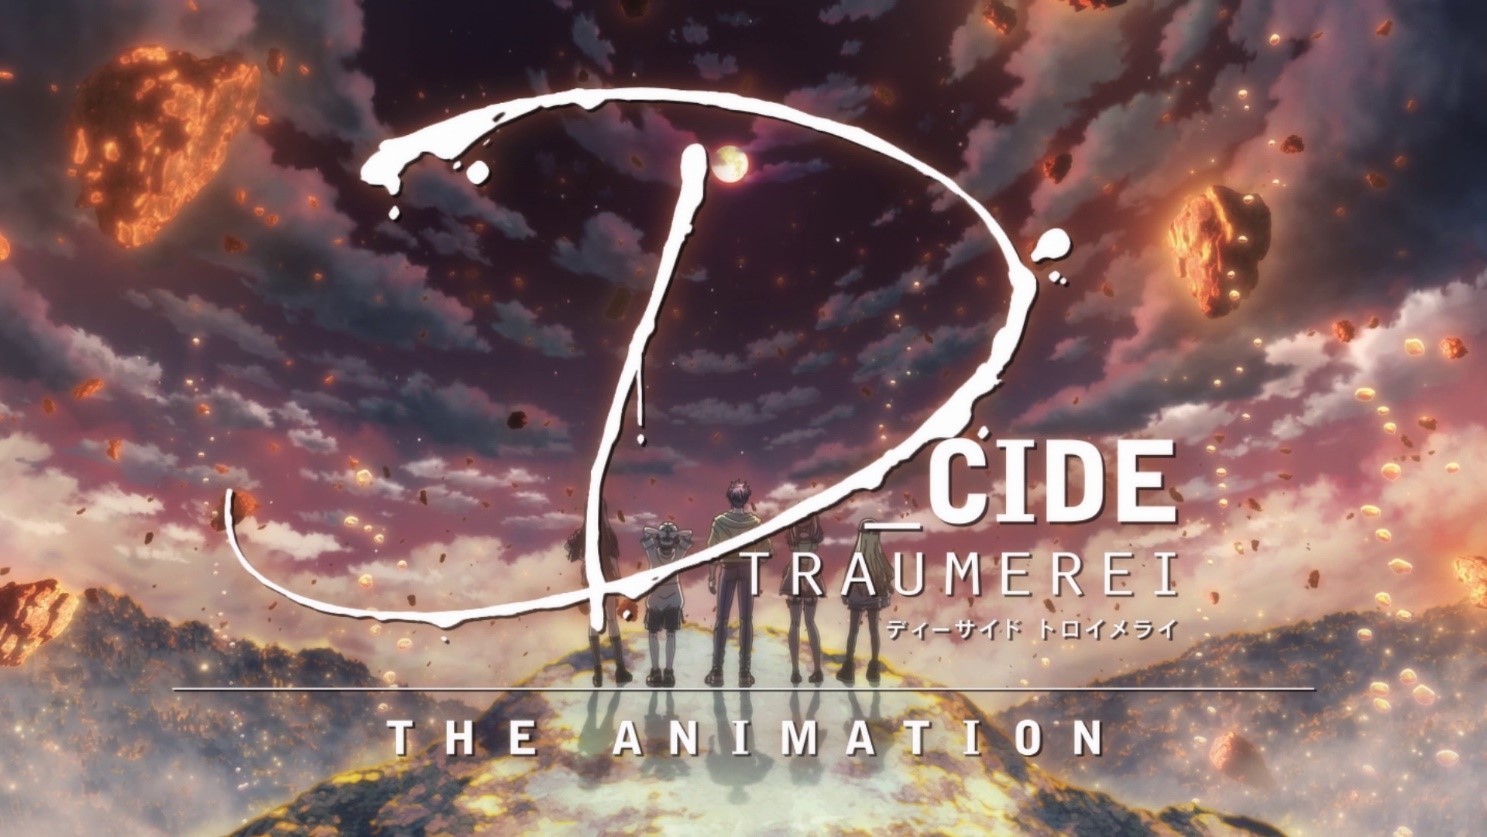 TVアニメ「D_CIDE TRAUMEREI THE ANIMATION」オープニング映像サムネイル